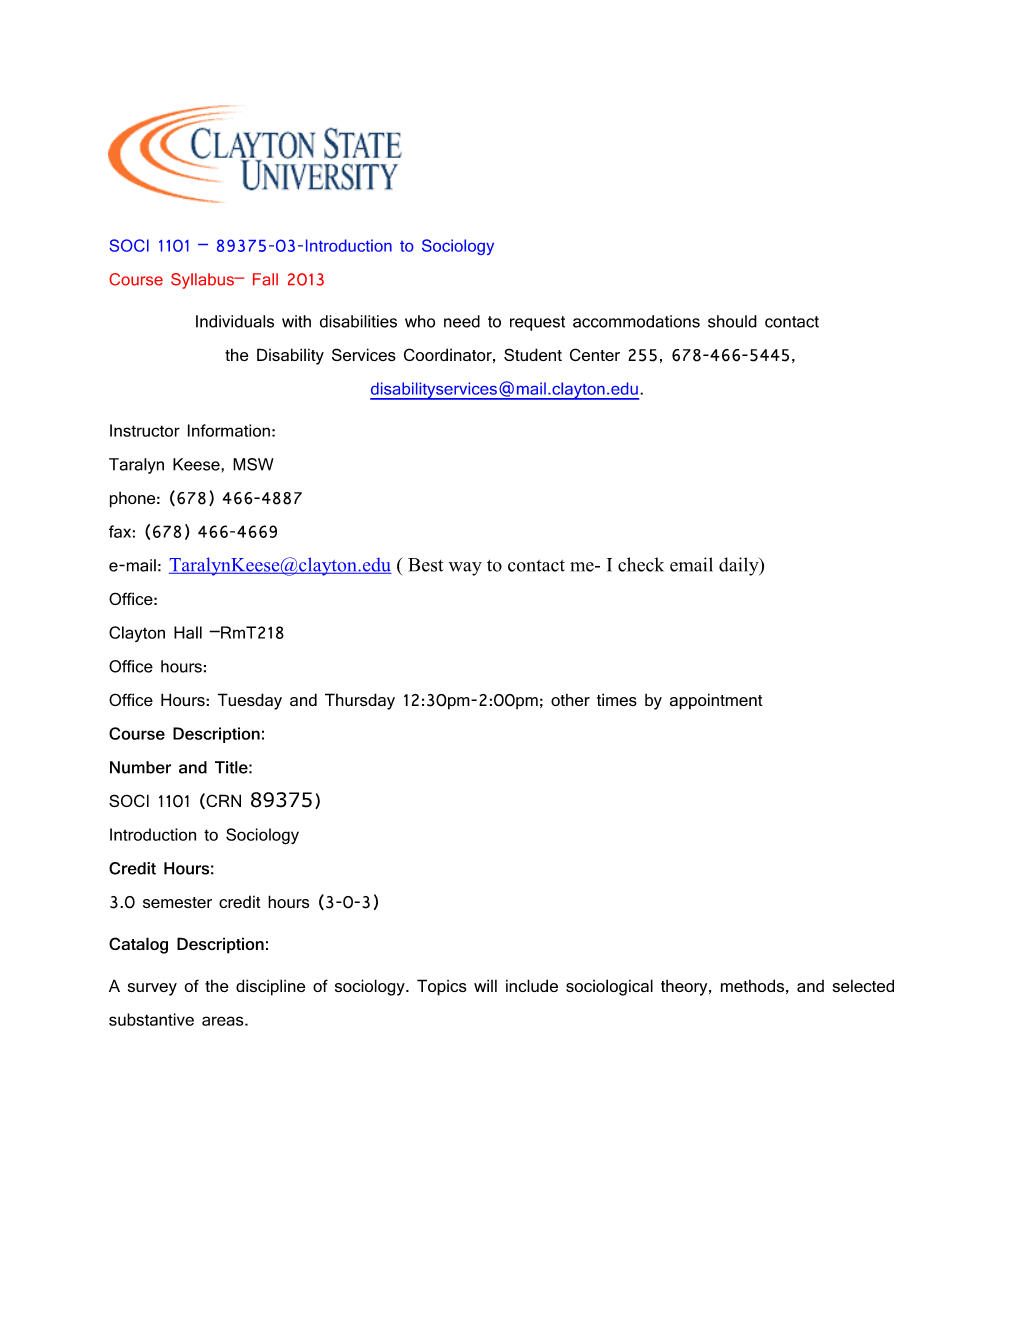 SOCI 1101 89375-03-Introduction to Sociology Course Syllabus Fall 2013